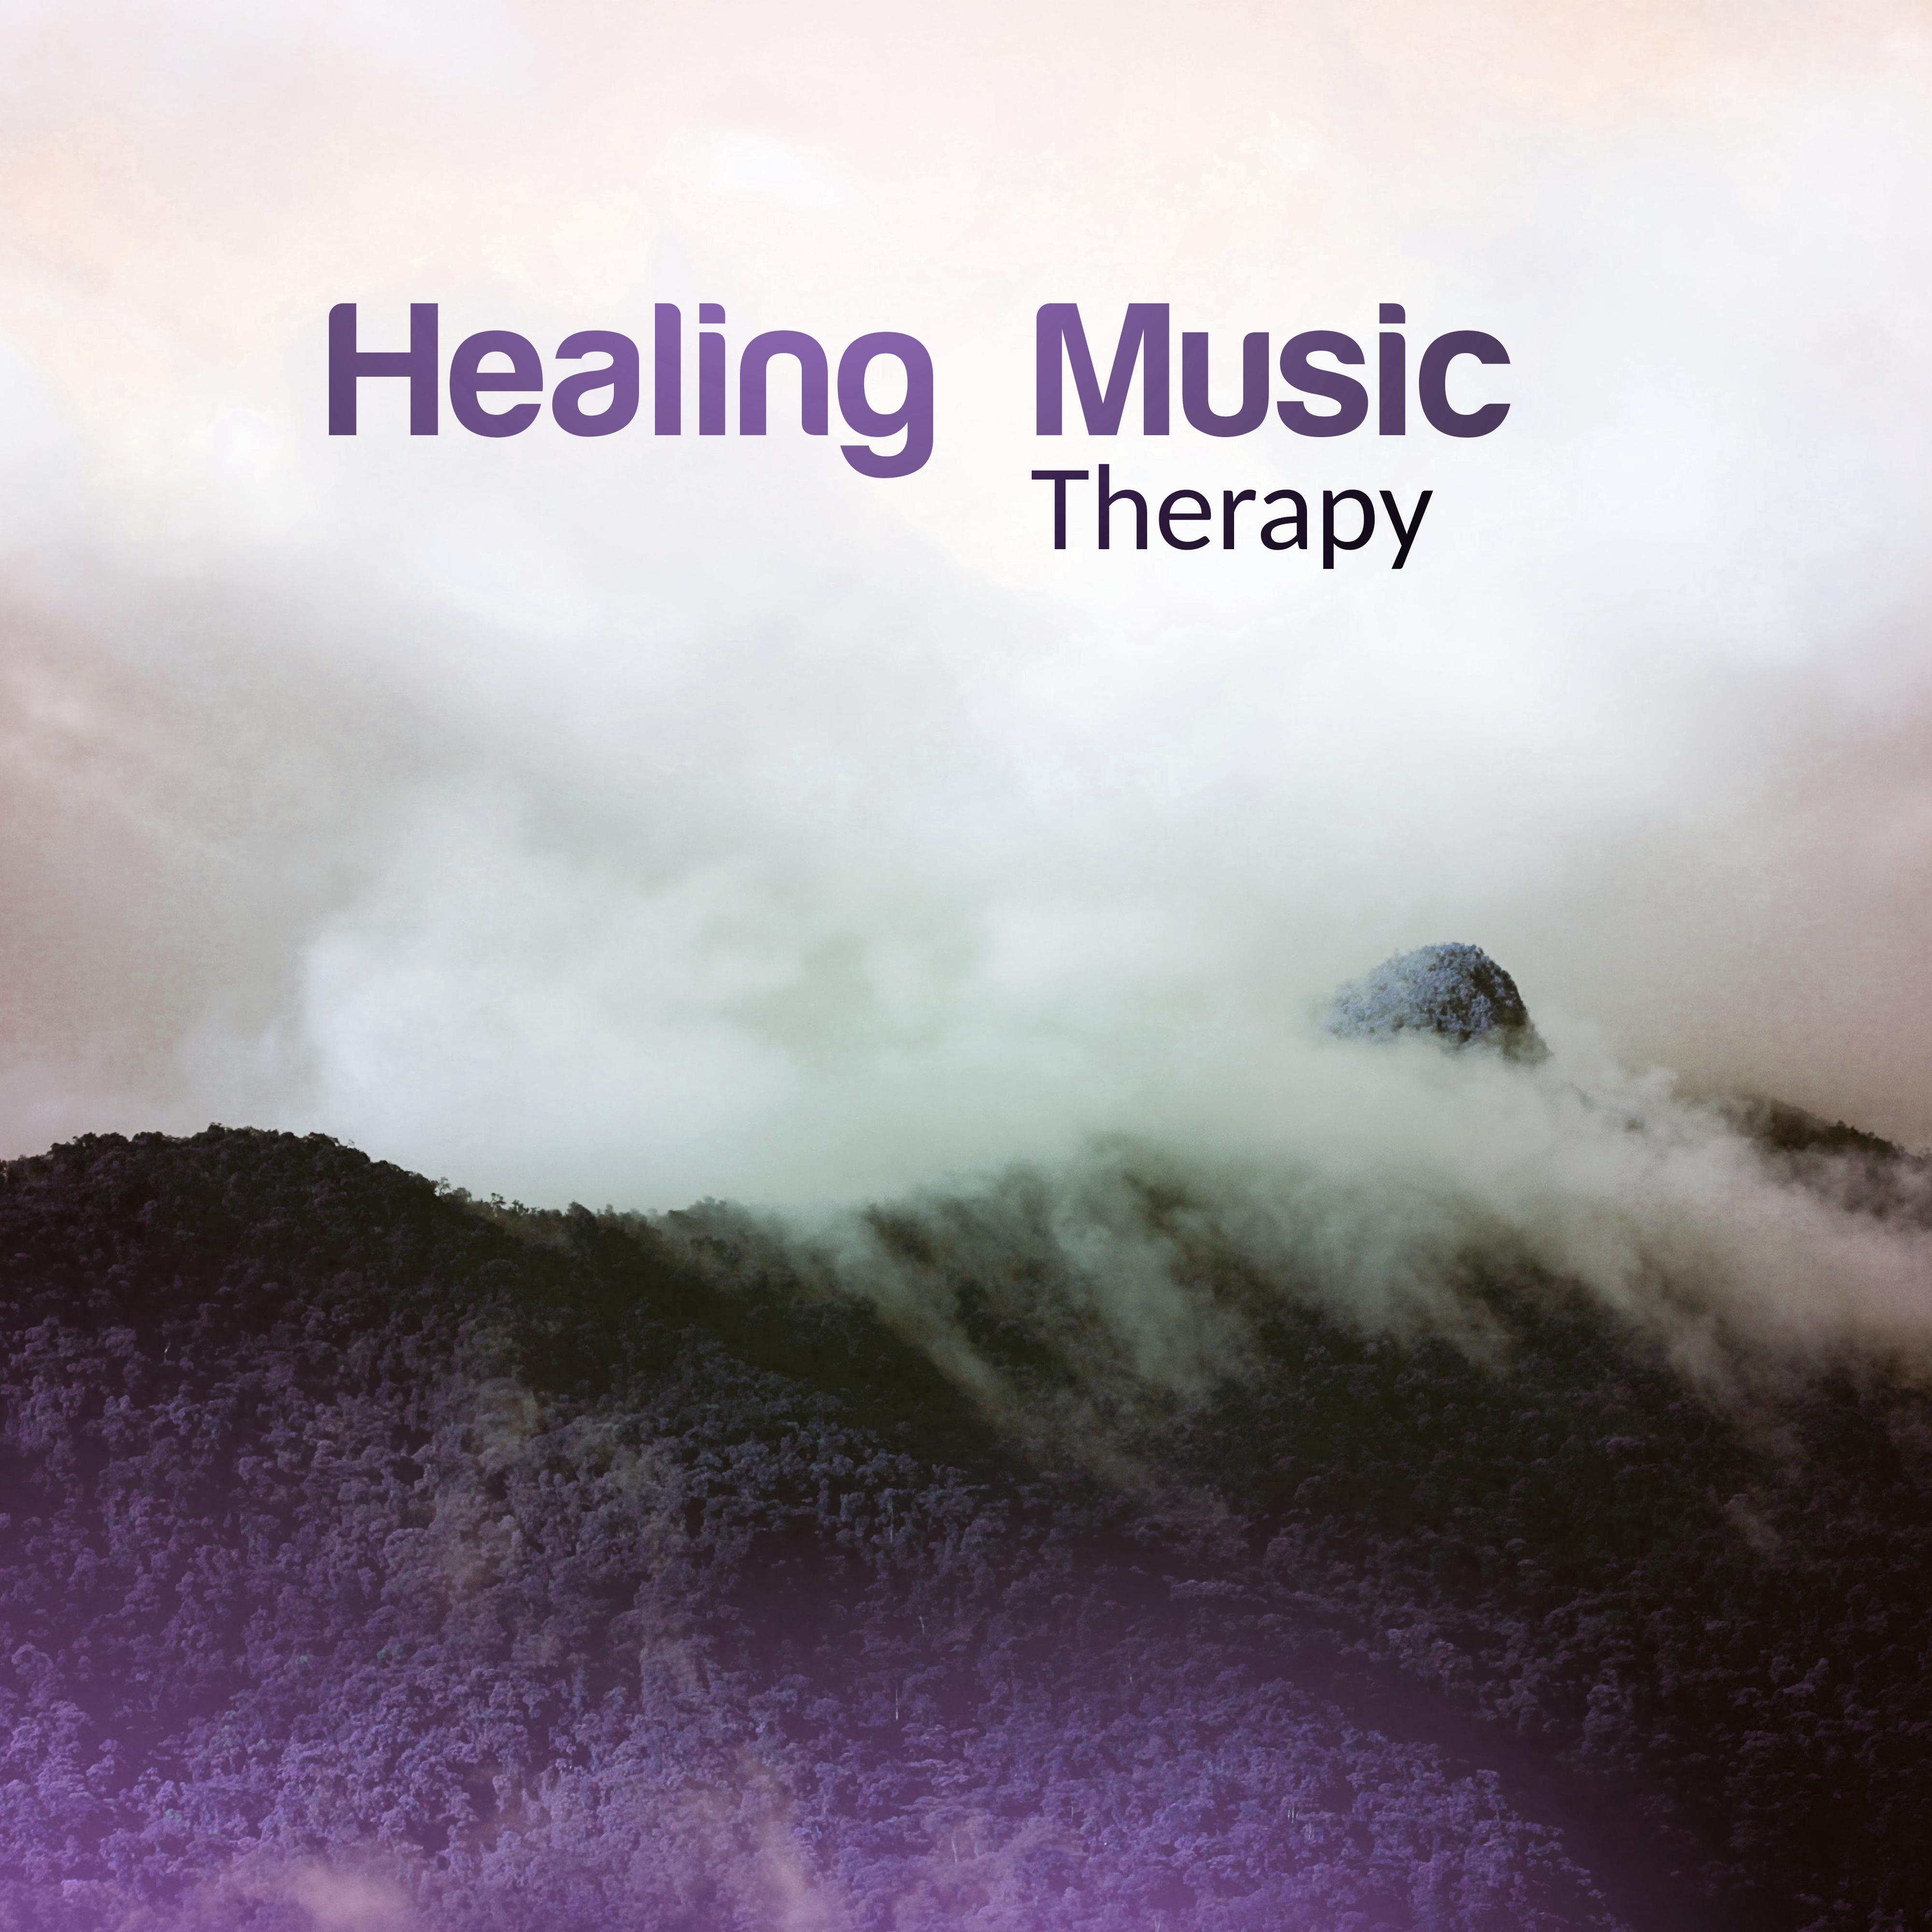 Healing Music Therapy – Relaxing Music, Bliss, Relax, Sounds of Nature, Zen, Calm of Mind